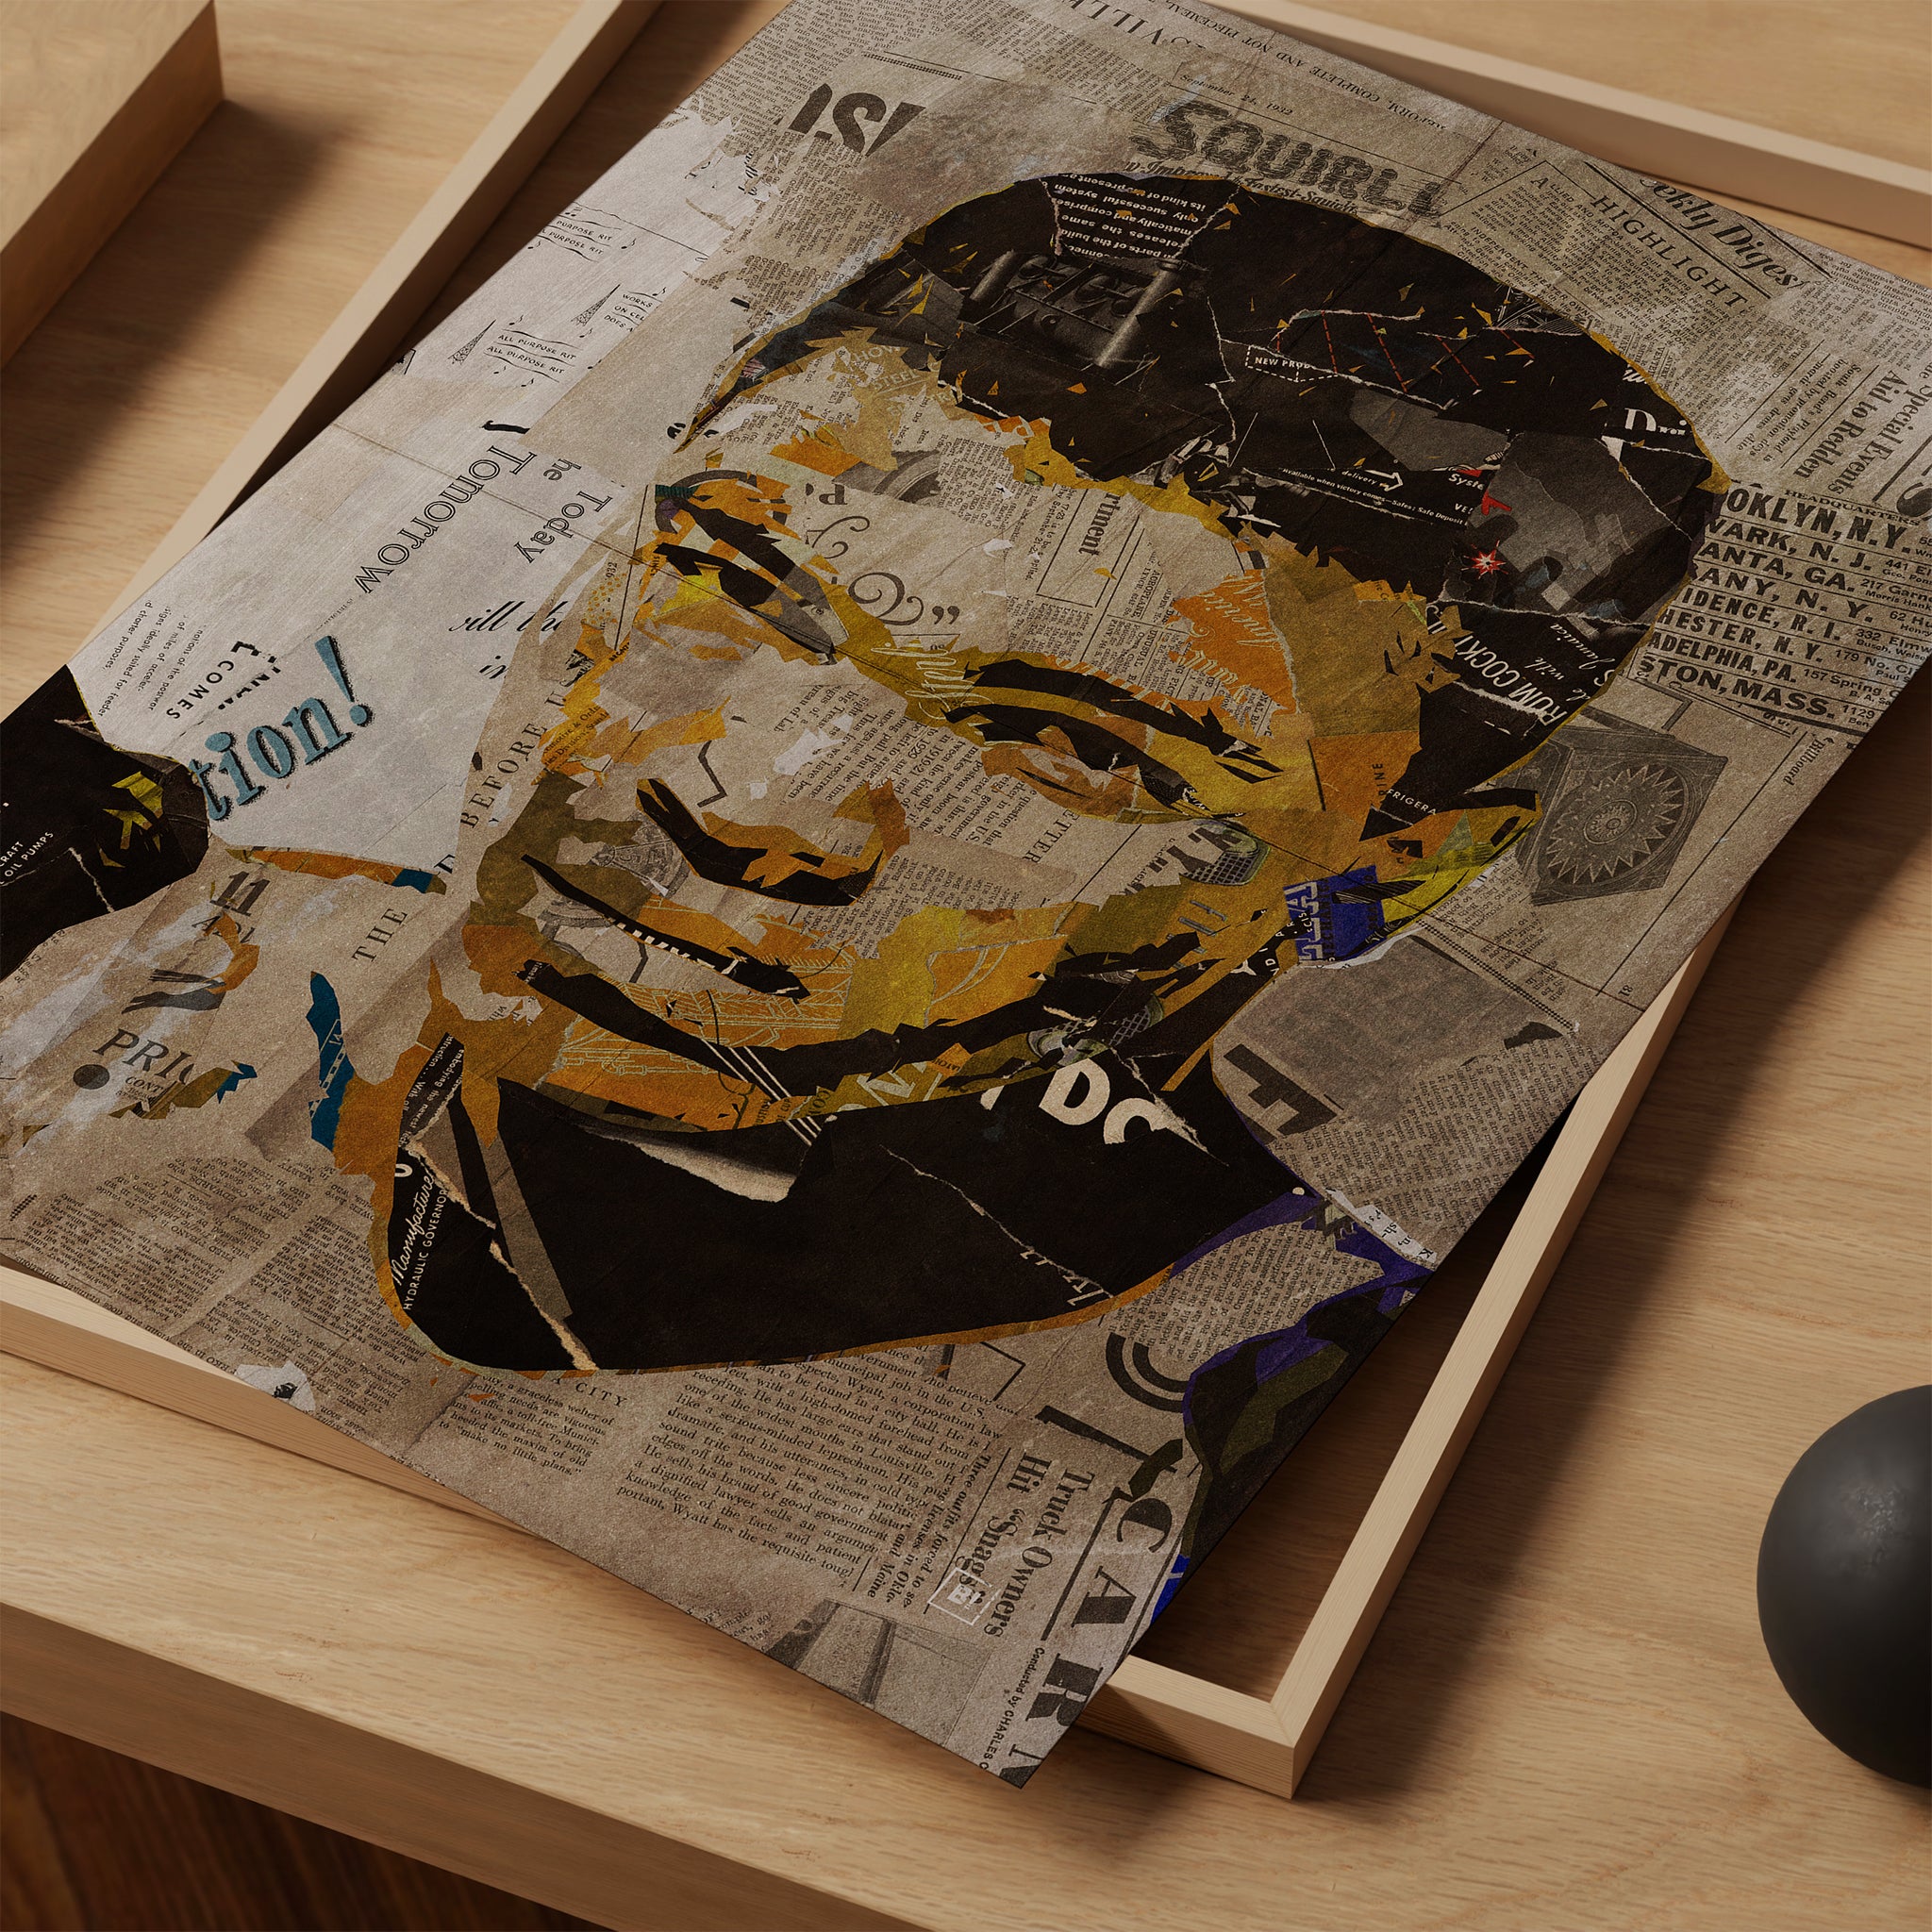 Be inspired by our iconic collage portrait art print of Muhammad Ali. This artwork was printed using the giclée process on archival acid-free paper and is presented as a print close-up, capturing its timeless beauty in every detail.